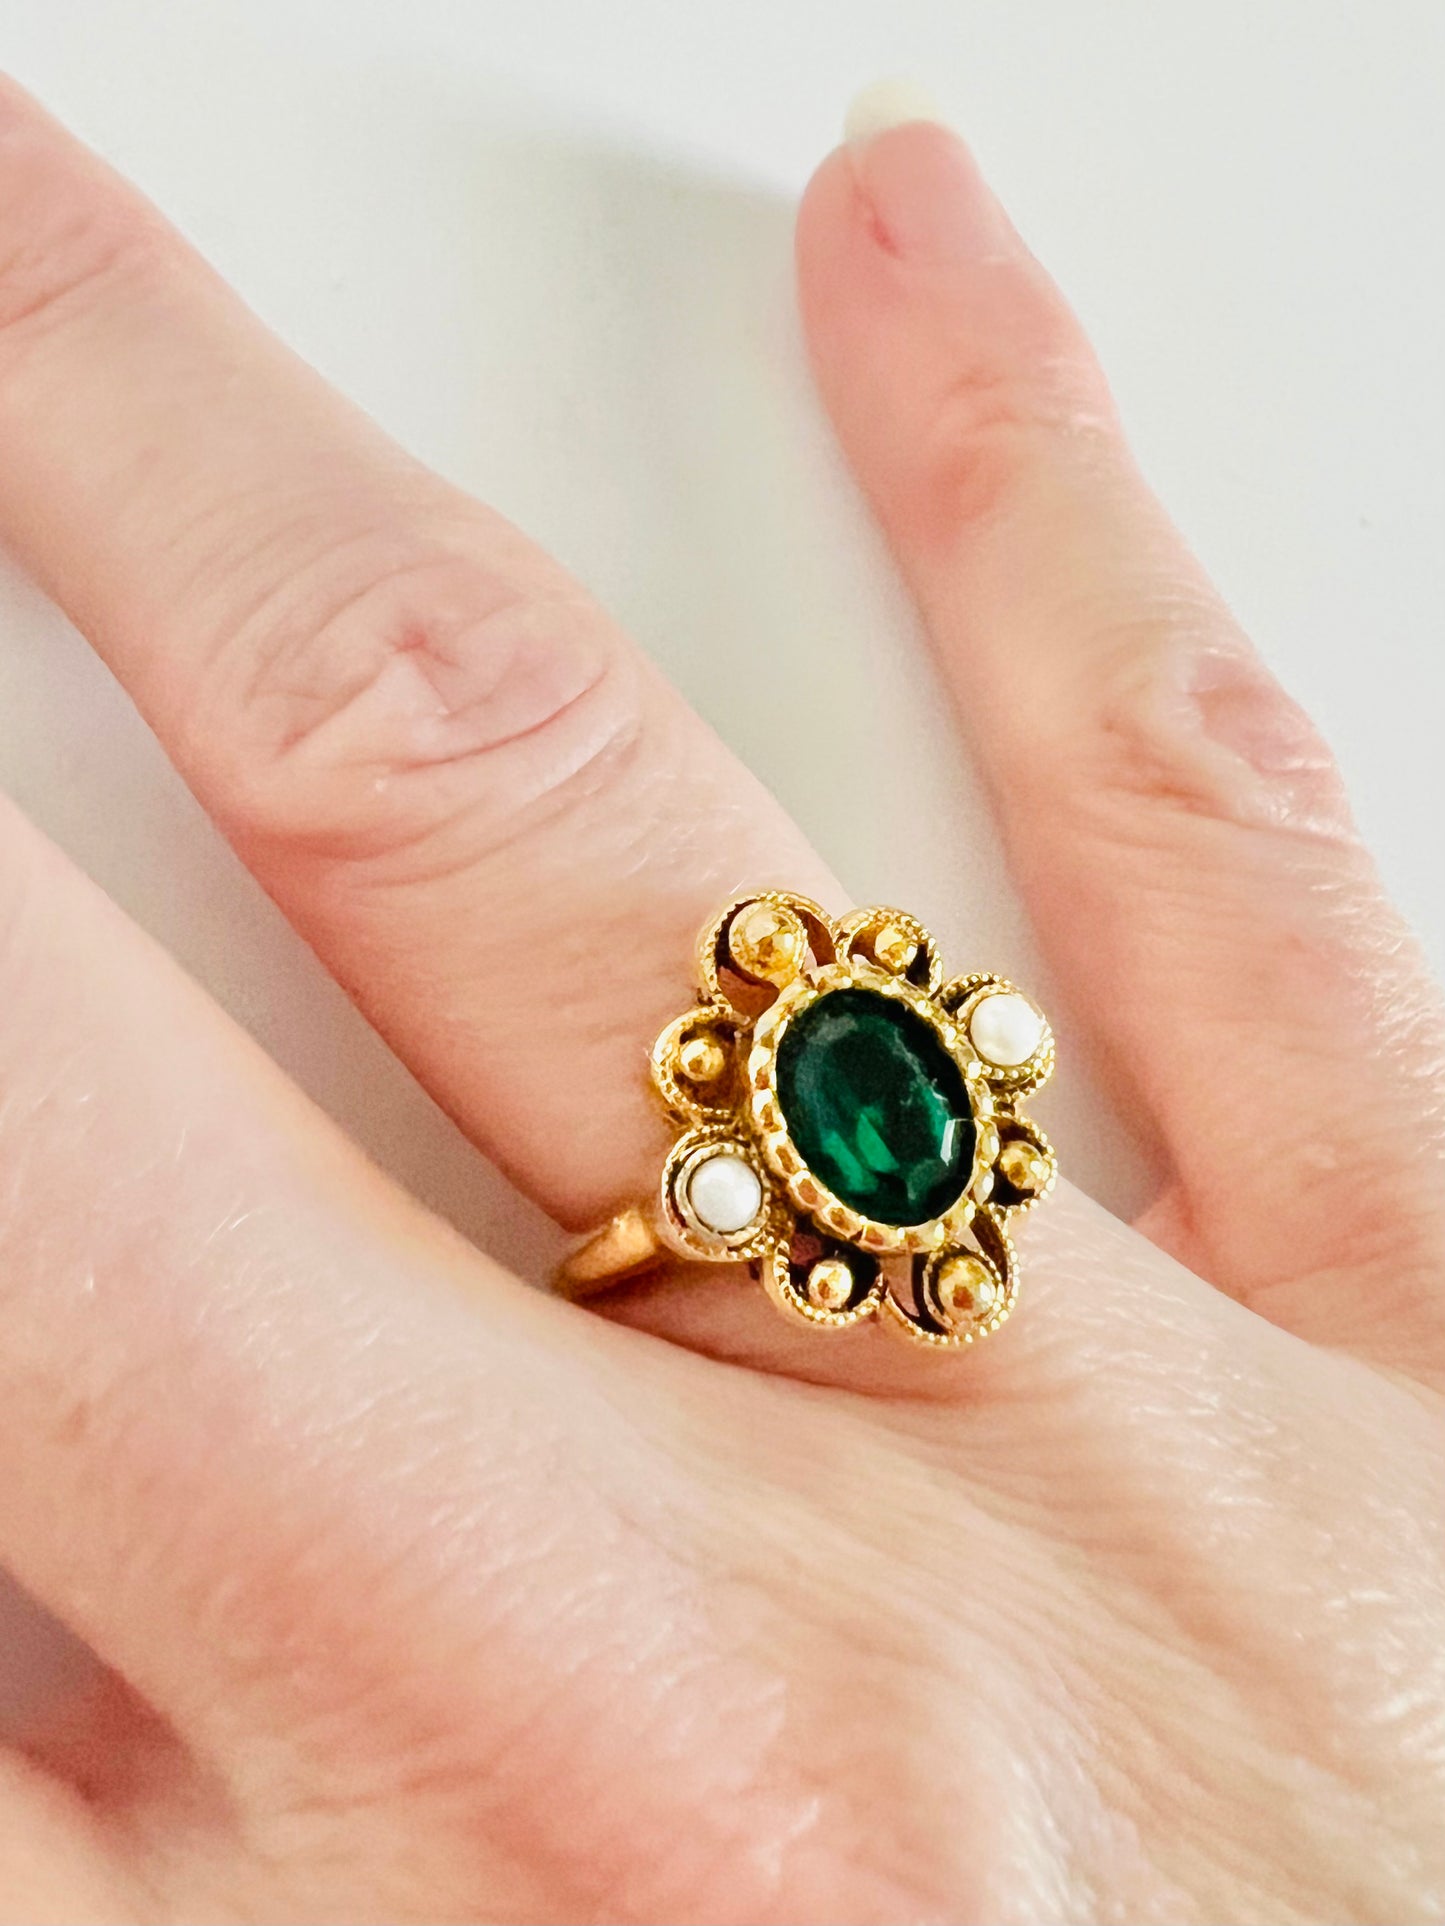 Vintage Avon Green Glass and Faux Pearl Ring